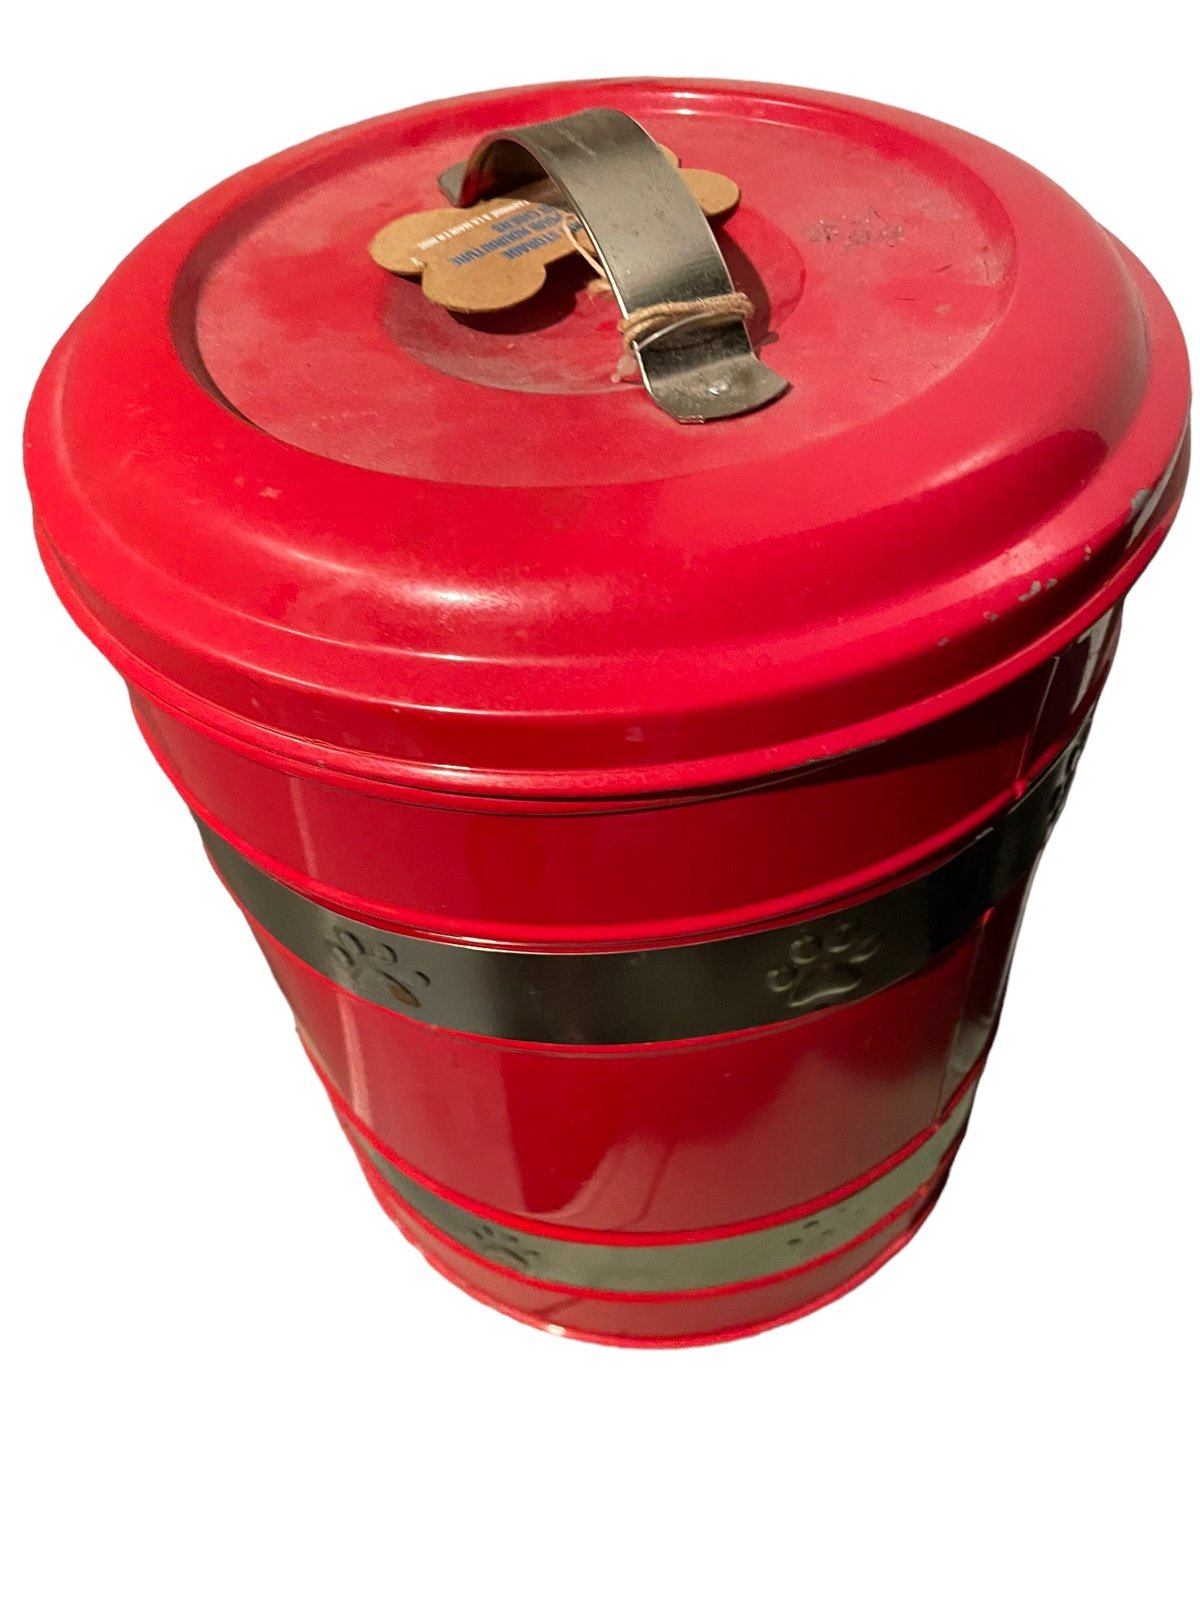 Fire hydrant dog food storage container bVyqc3D9t